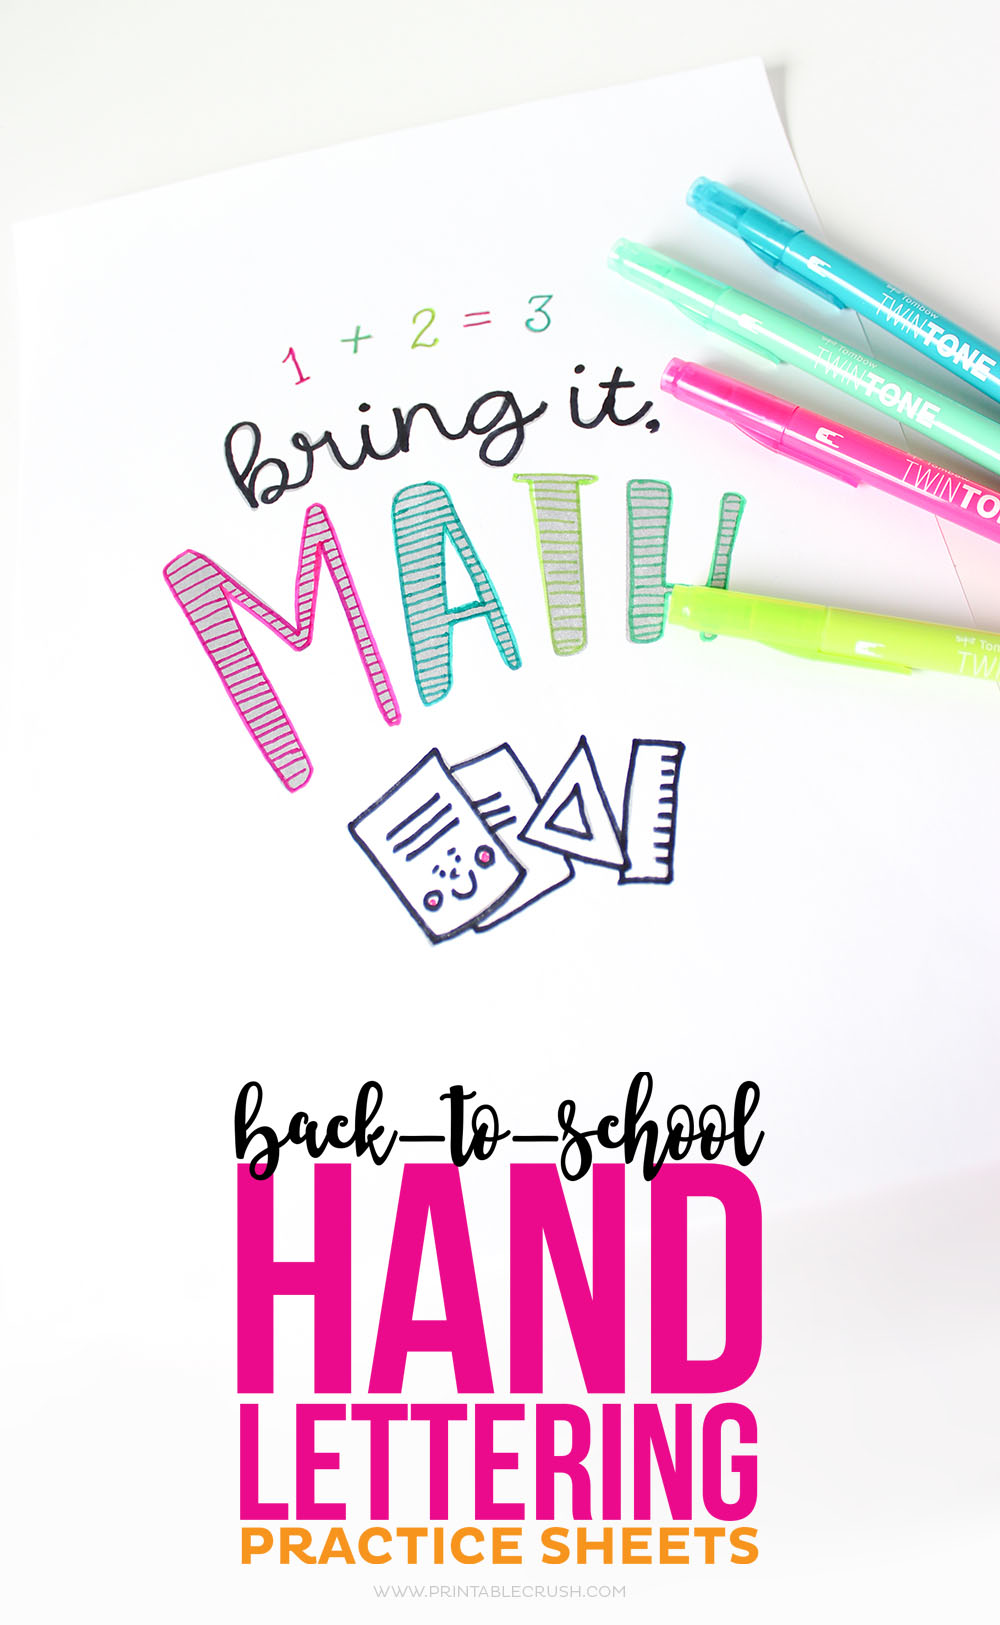 http://printablecrush.com/wp-content/uploads/2017/07/Back-to-School-Hand-Lettering-Practice-Sheets-28-copy.jpg